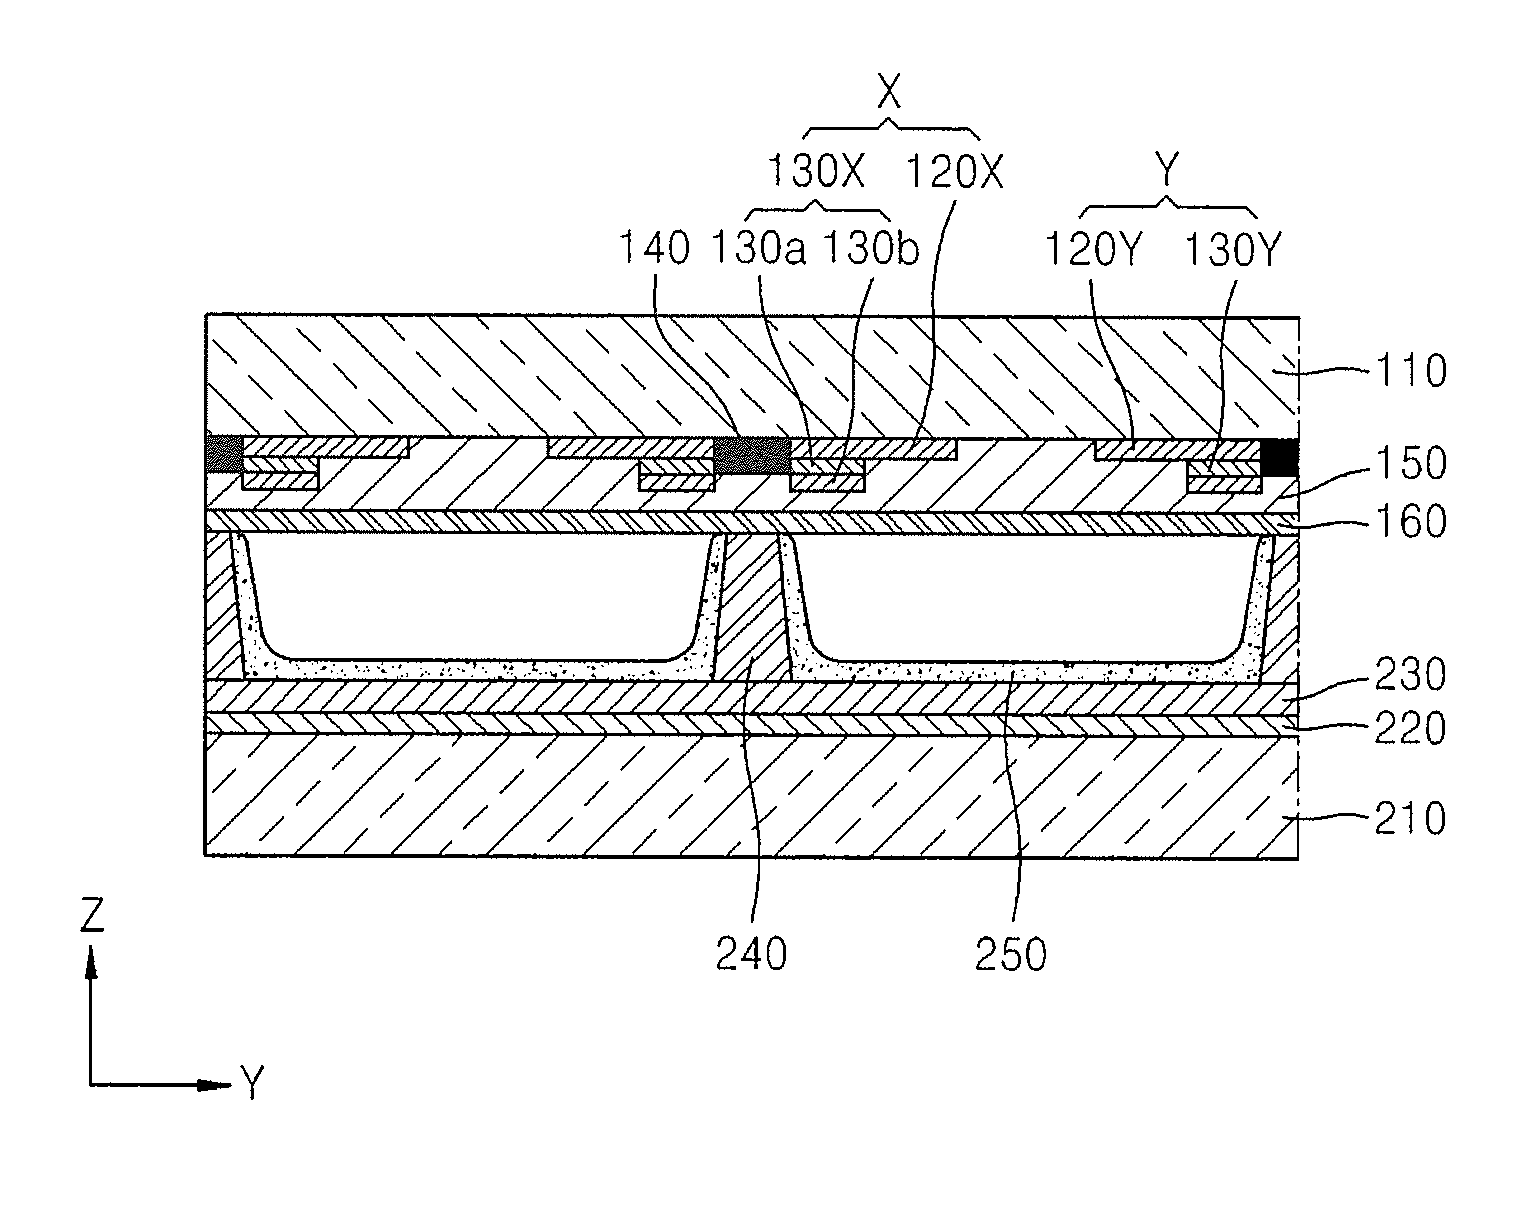 Substrate structure for plasma display panel, method of manufacturing the substrate structure, and plasma display panel including the substrate structure